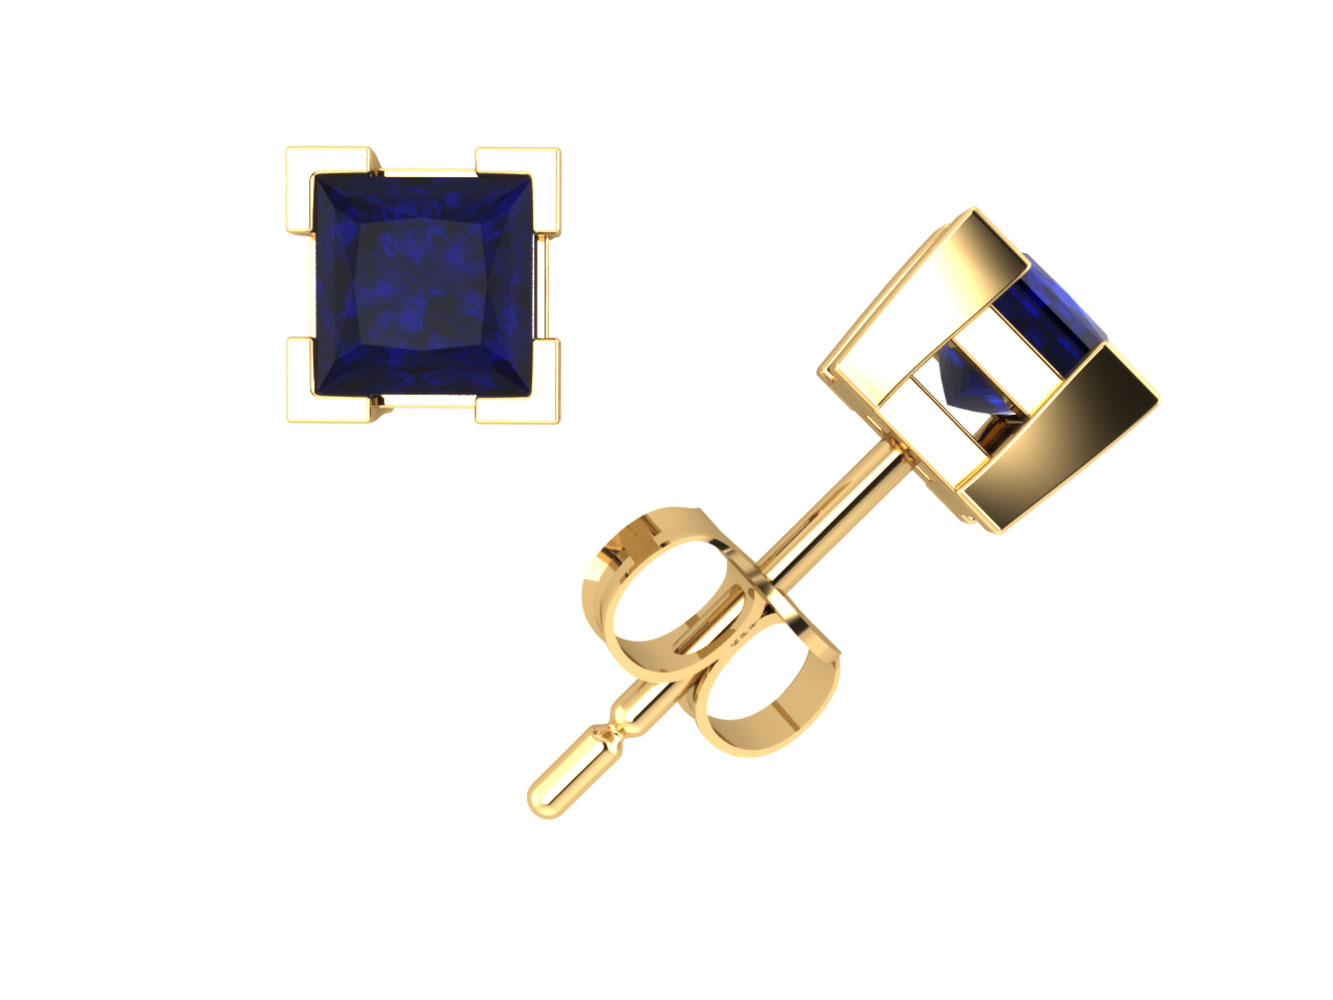 Jewel We Sell 0.75Ct Princess Blue Sapphire Stud Earrings 14k White or Yellow Gold V-Prong Push Back AAA Quality